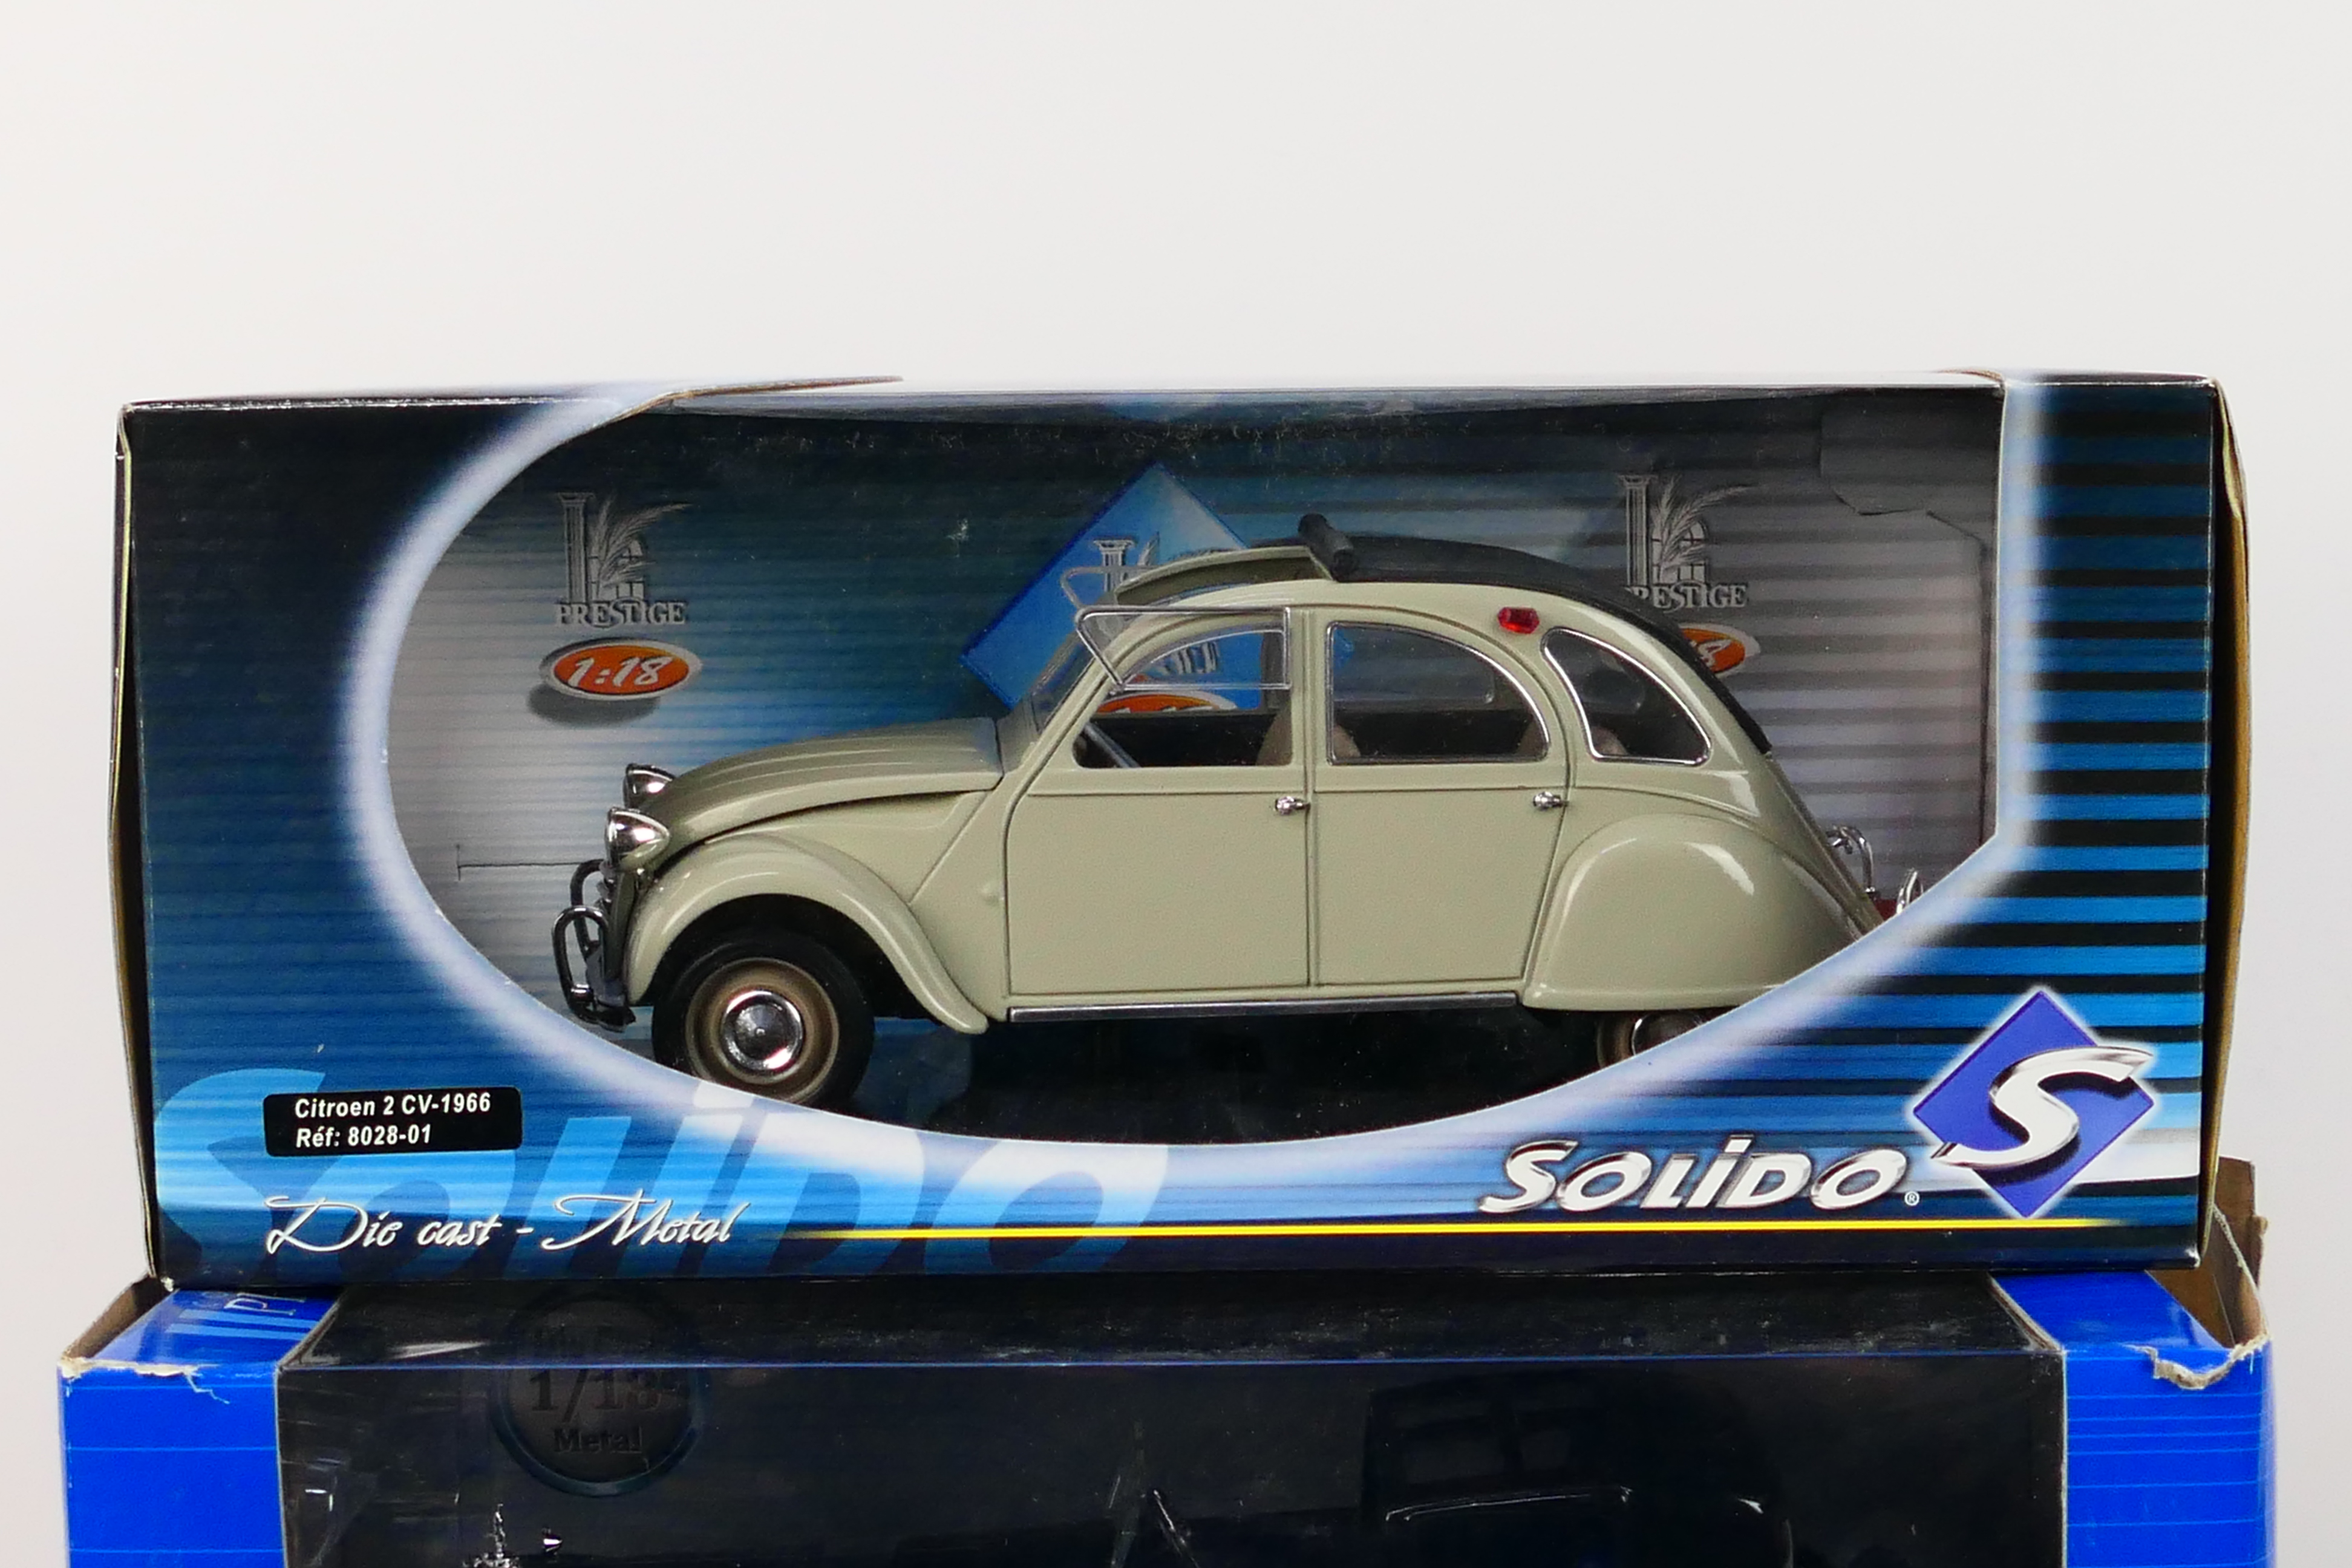 Solido - Two boxed diecast 1:18 scale model cars from Solido, - Image 2 of 3